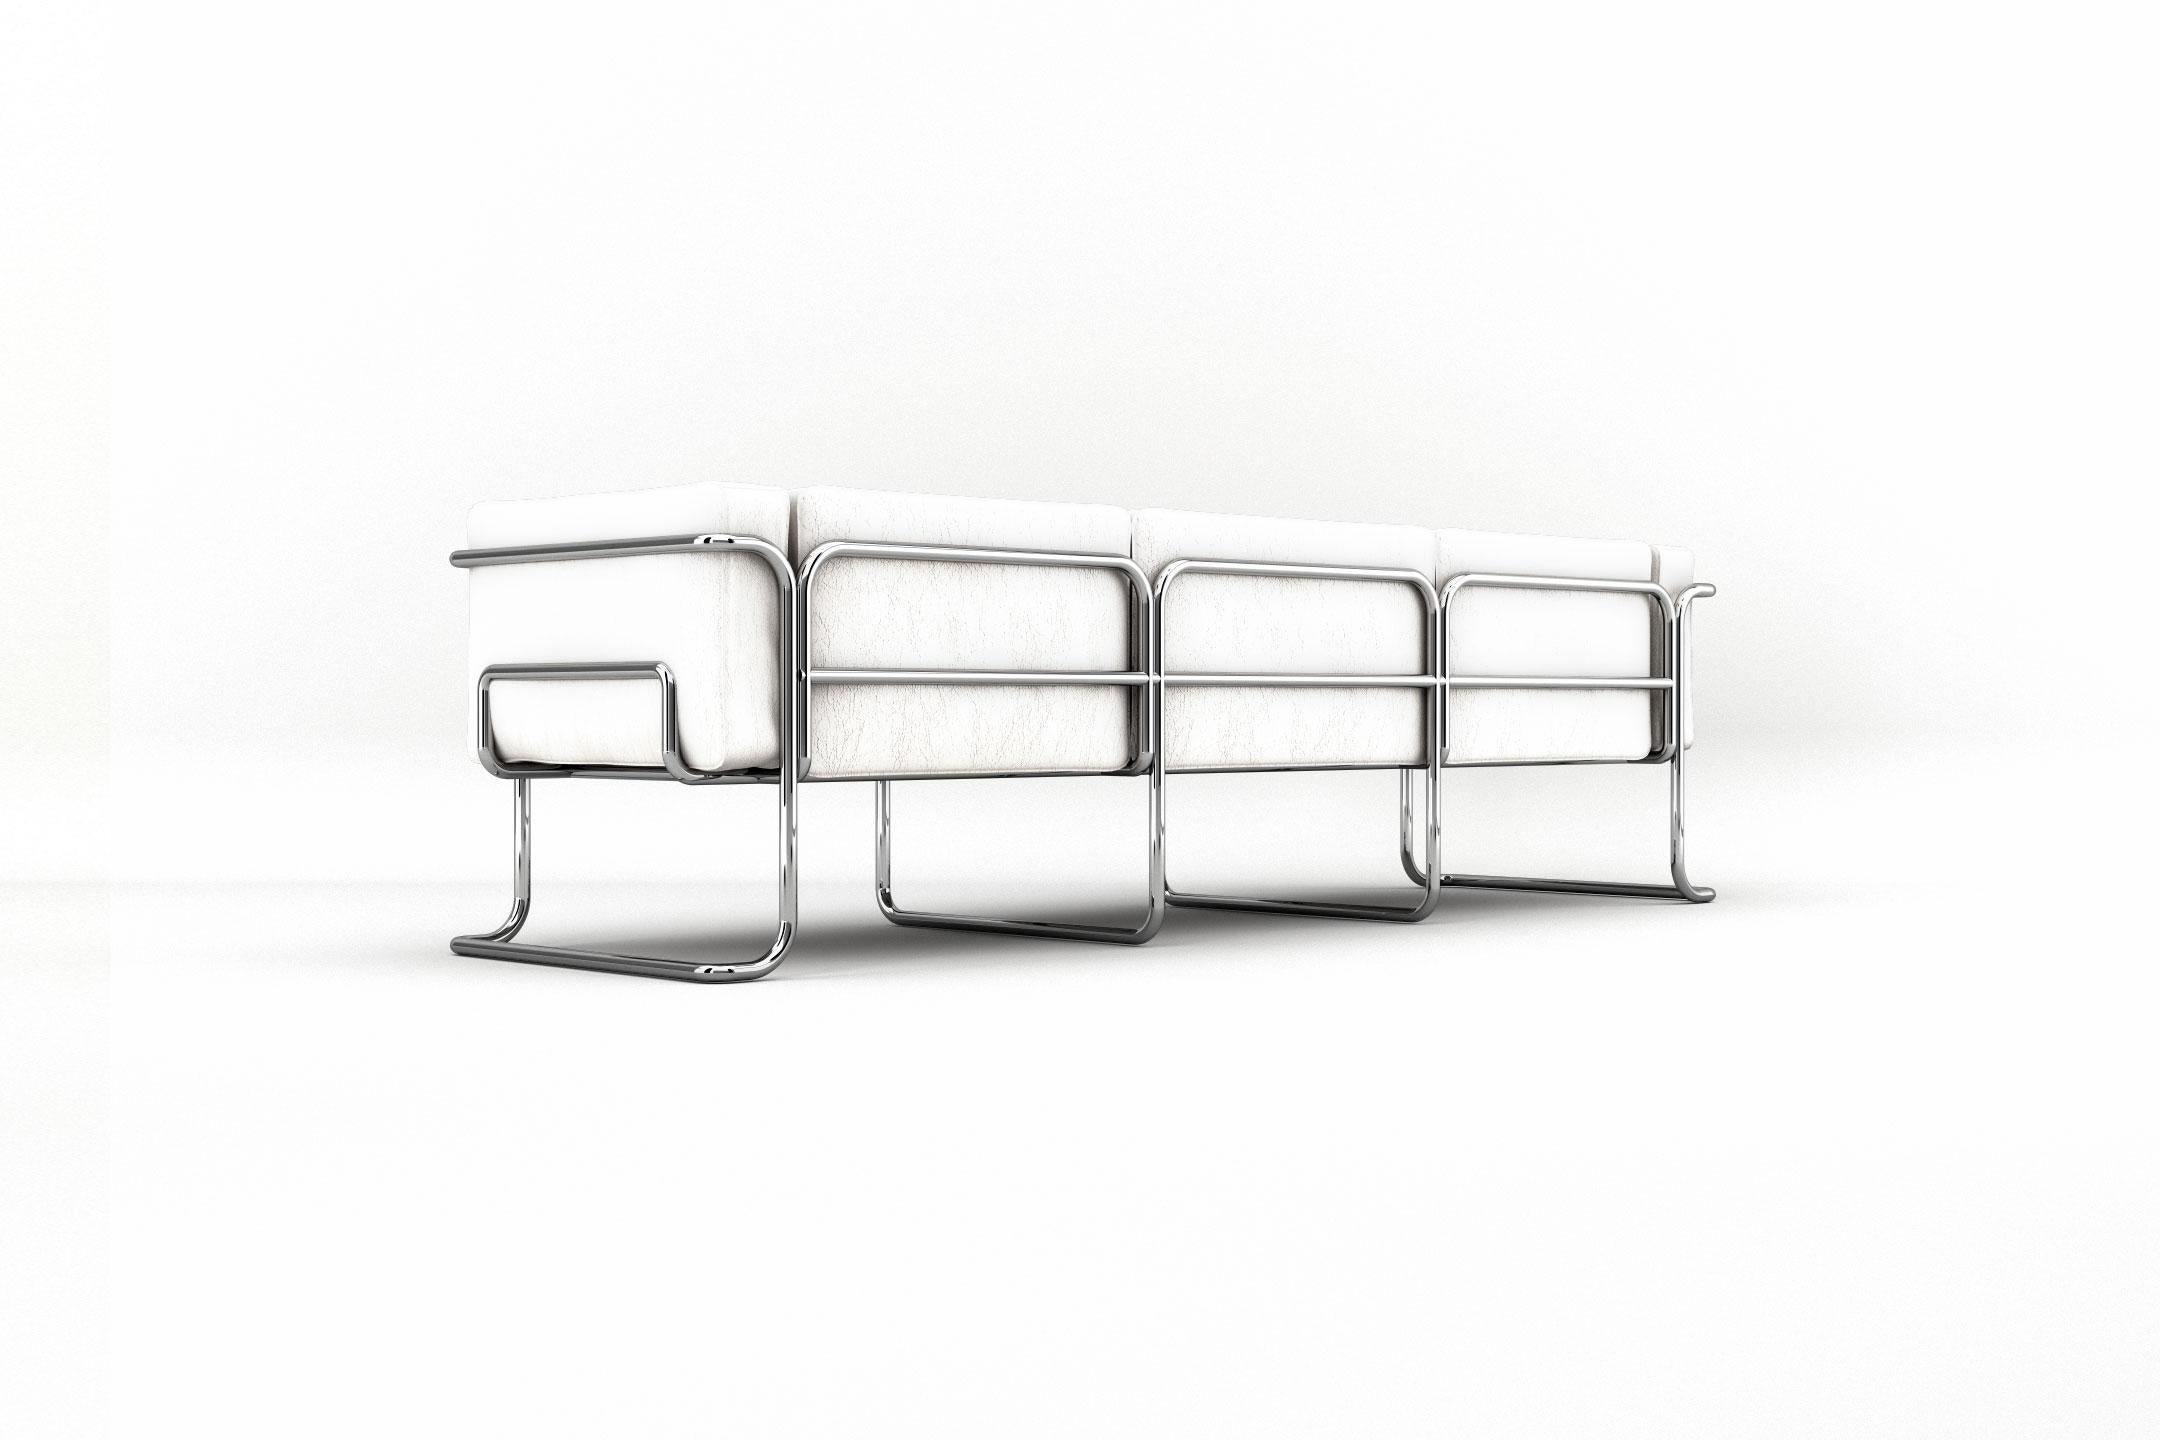 Polished Lotus 3 Seat Sofa - Modern White Leather Sofa with Stainless Steel Legs For Sale